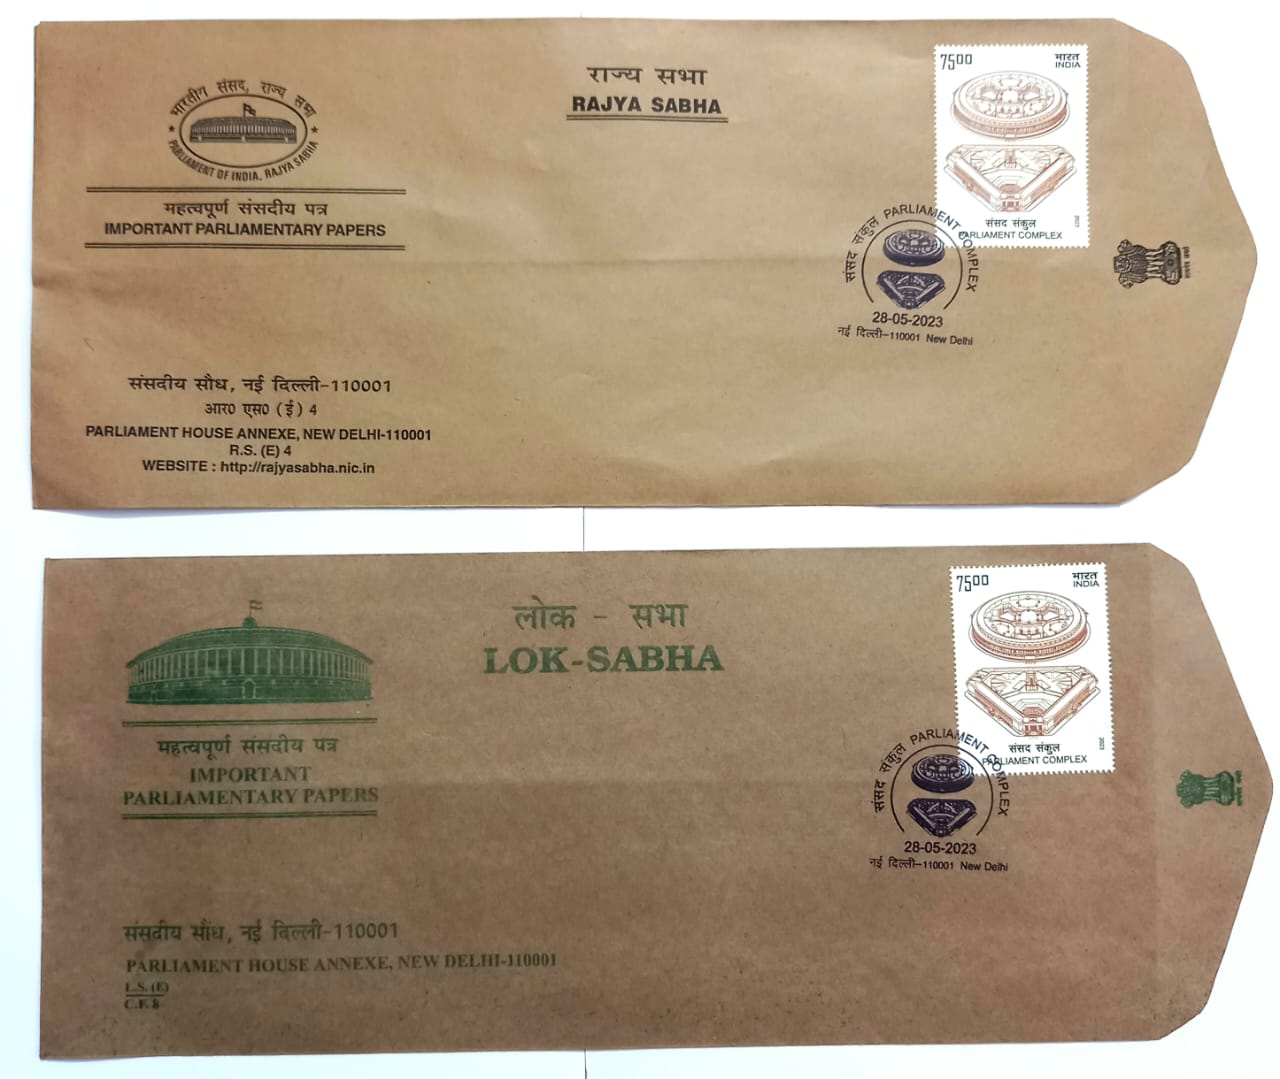 Important Parliamentary Papers- Original Envelope used by 𝐑𝐚𝐣𝐲𝐚 𝐒𝐚𝐛𝐡𝐚 & 𝐋𝐨𝐤 𝐒𝐚𝐛𝐡𝐚 With Parliament Complex Stamp & Cancellation